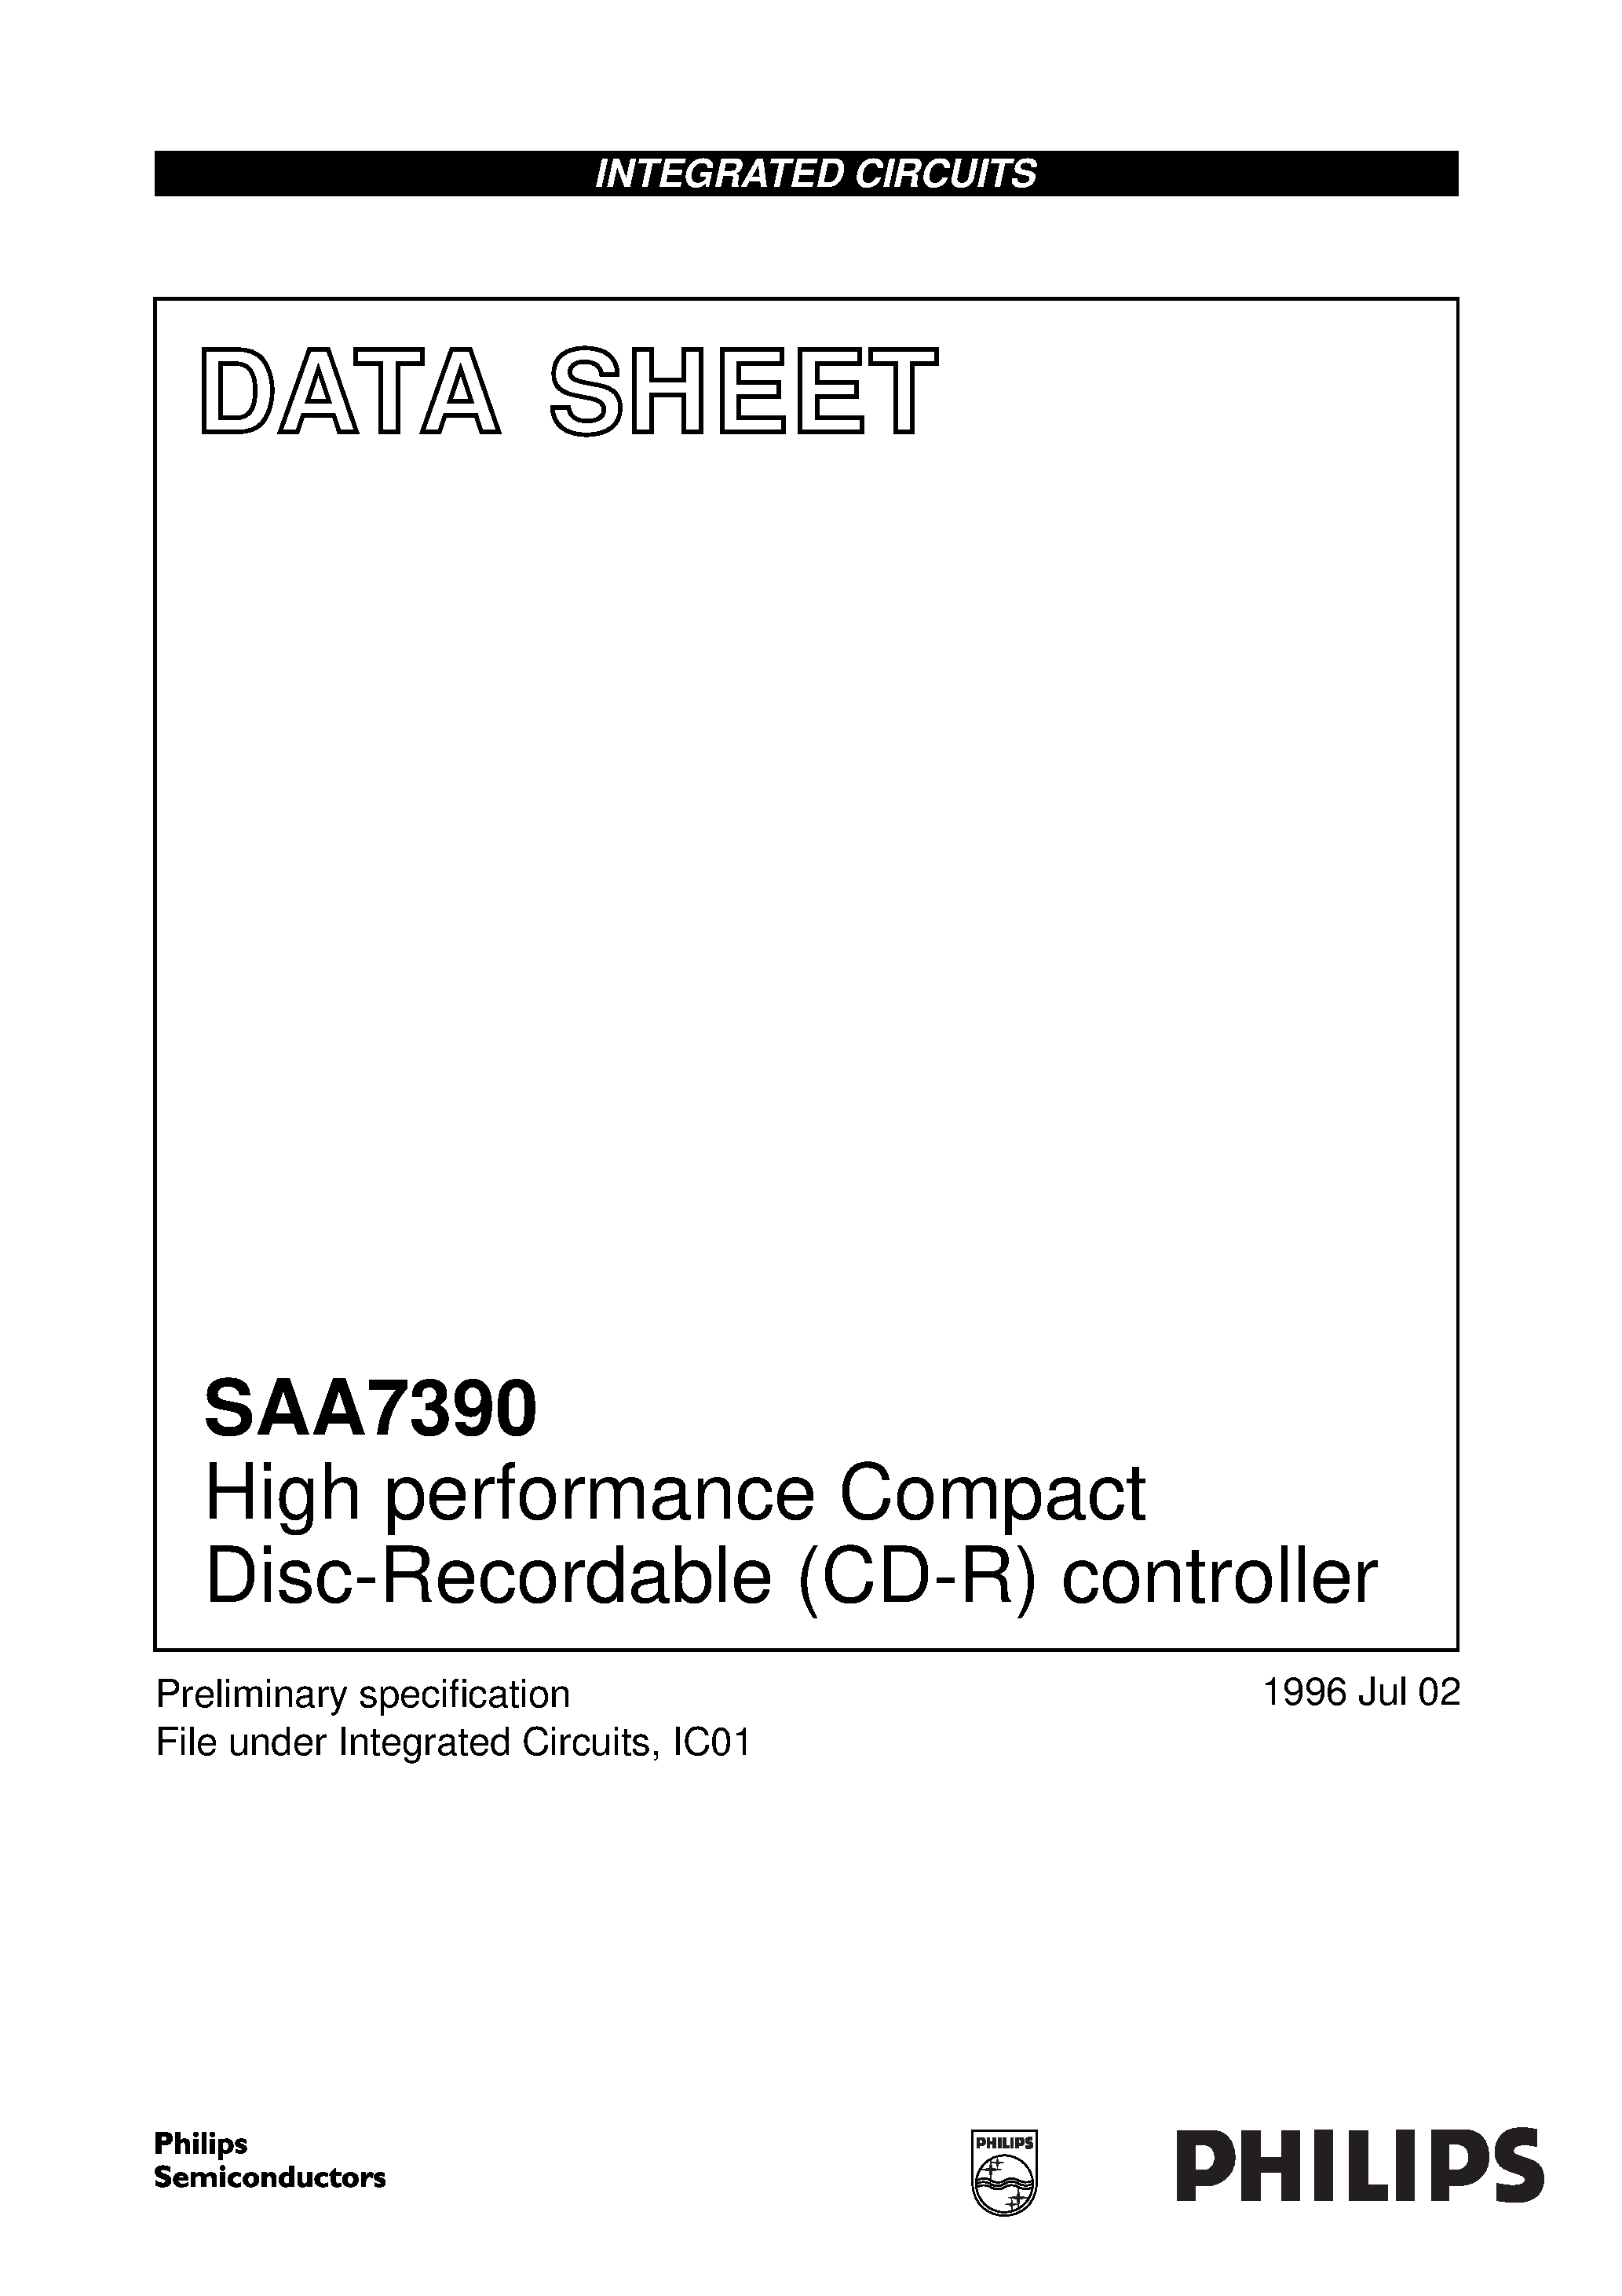 Datasheet SAA7390 - High performance Compact Disc-Recordable CD-R controller page 1